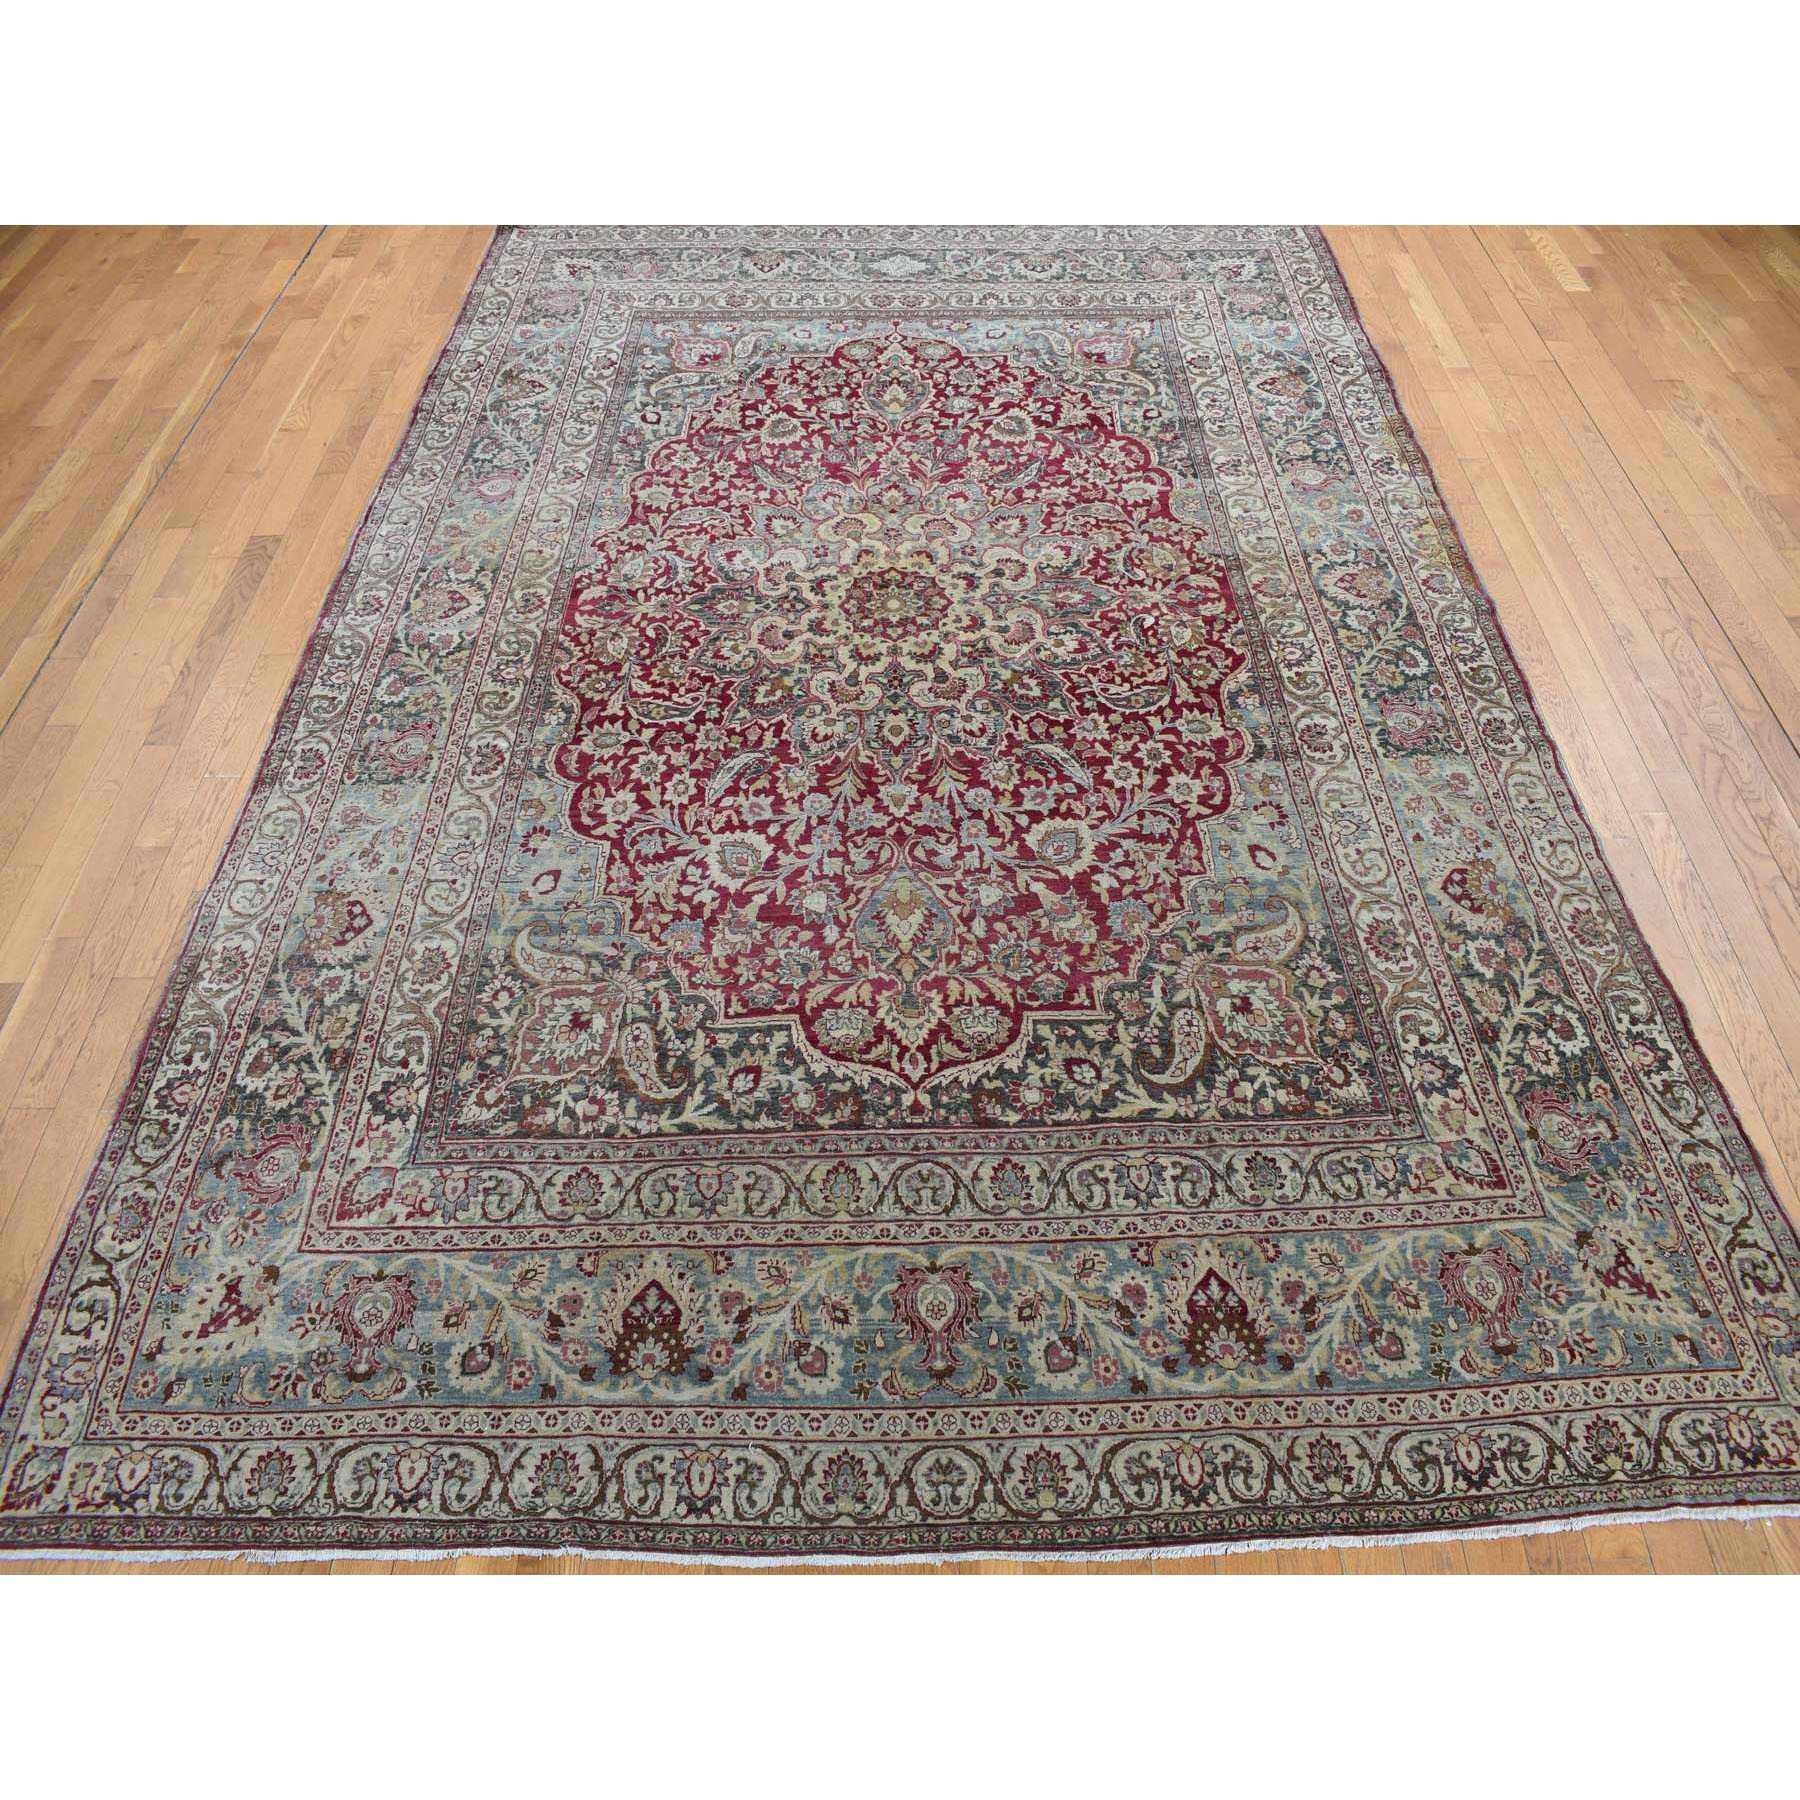 Medieval Crimson Red Antique Persian Khorsan Hand Knotted Pure Wool Clean Rug 8'9